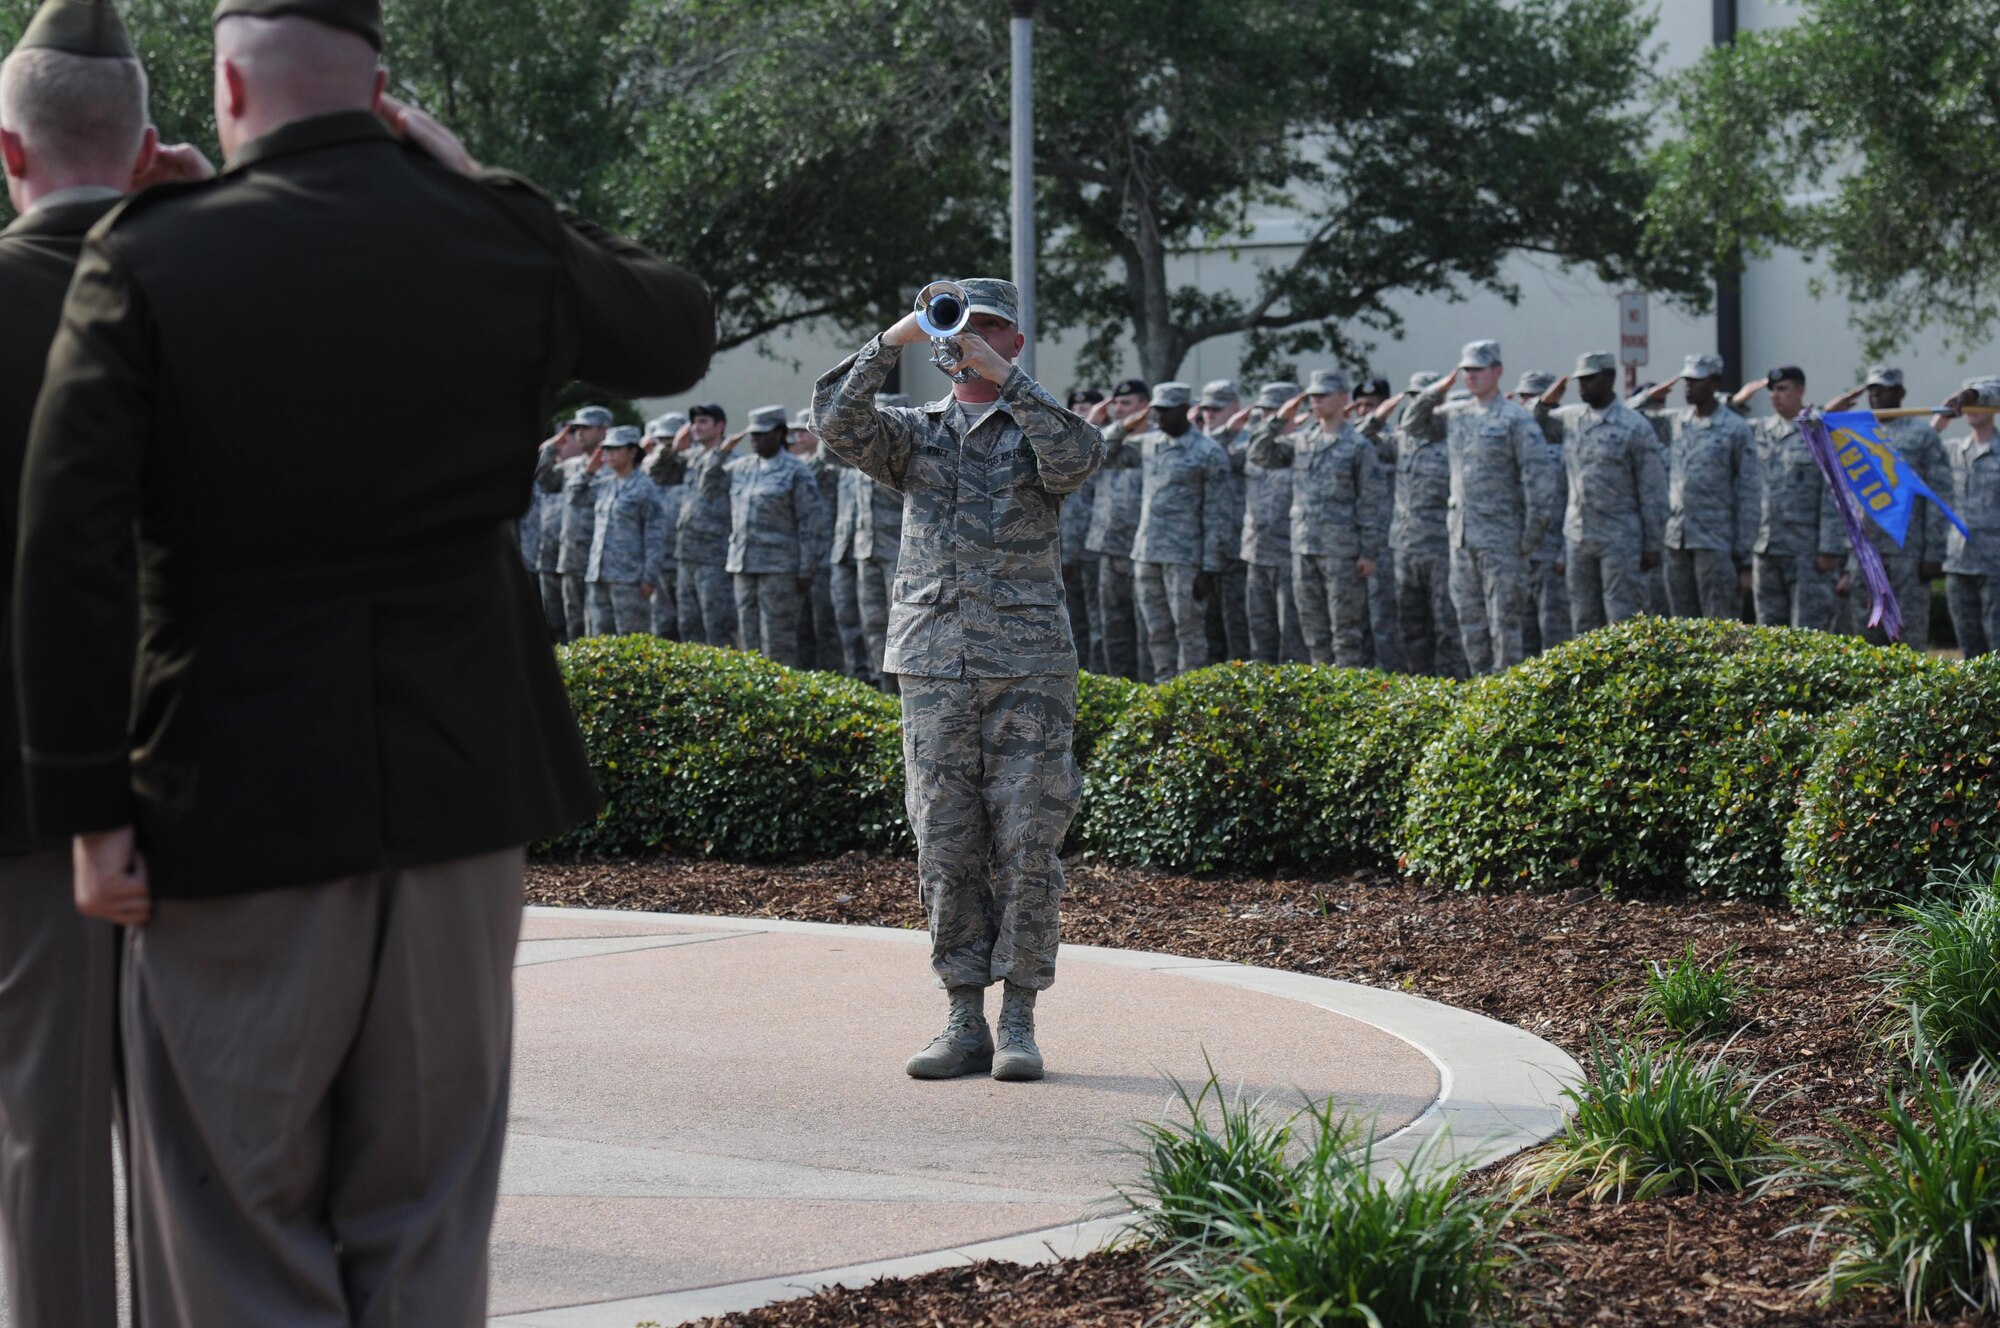 Airman 1st Class Robert Wyatt, 338th Training Squadron student, plays taps during the Lt. Samuel Reeves Keesler, Jr. Memorial Retreat Ceremony May 13, 2016, Keesler Air Force Base, Miss. The event was held in honor of Lt. Keesler’s date of entry into the Army Air Service 99 years ago. The retreat ceremony is part of a year-long celebration of Lt. Keesler, a Mississippi native and WORLD WAR I hero, and the 75th anniversary of the opening of the base. (U.S. Air Force photo by Kemberly Groue)